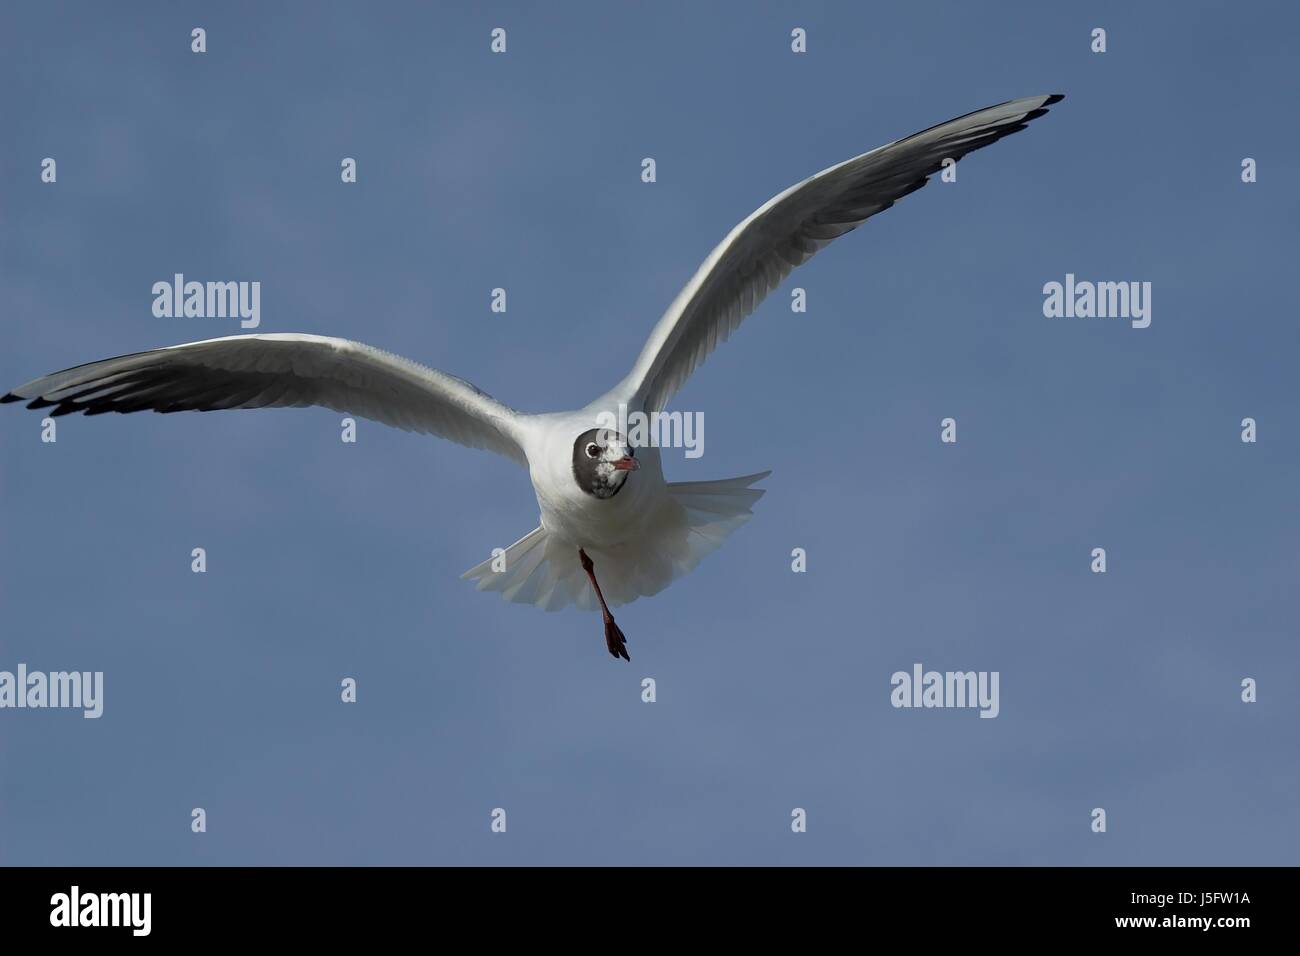 blue flight blank european caucasian wing feathering open frontally disabled Stock Photo